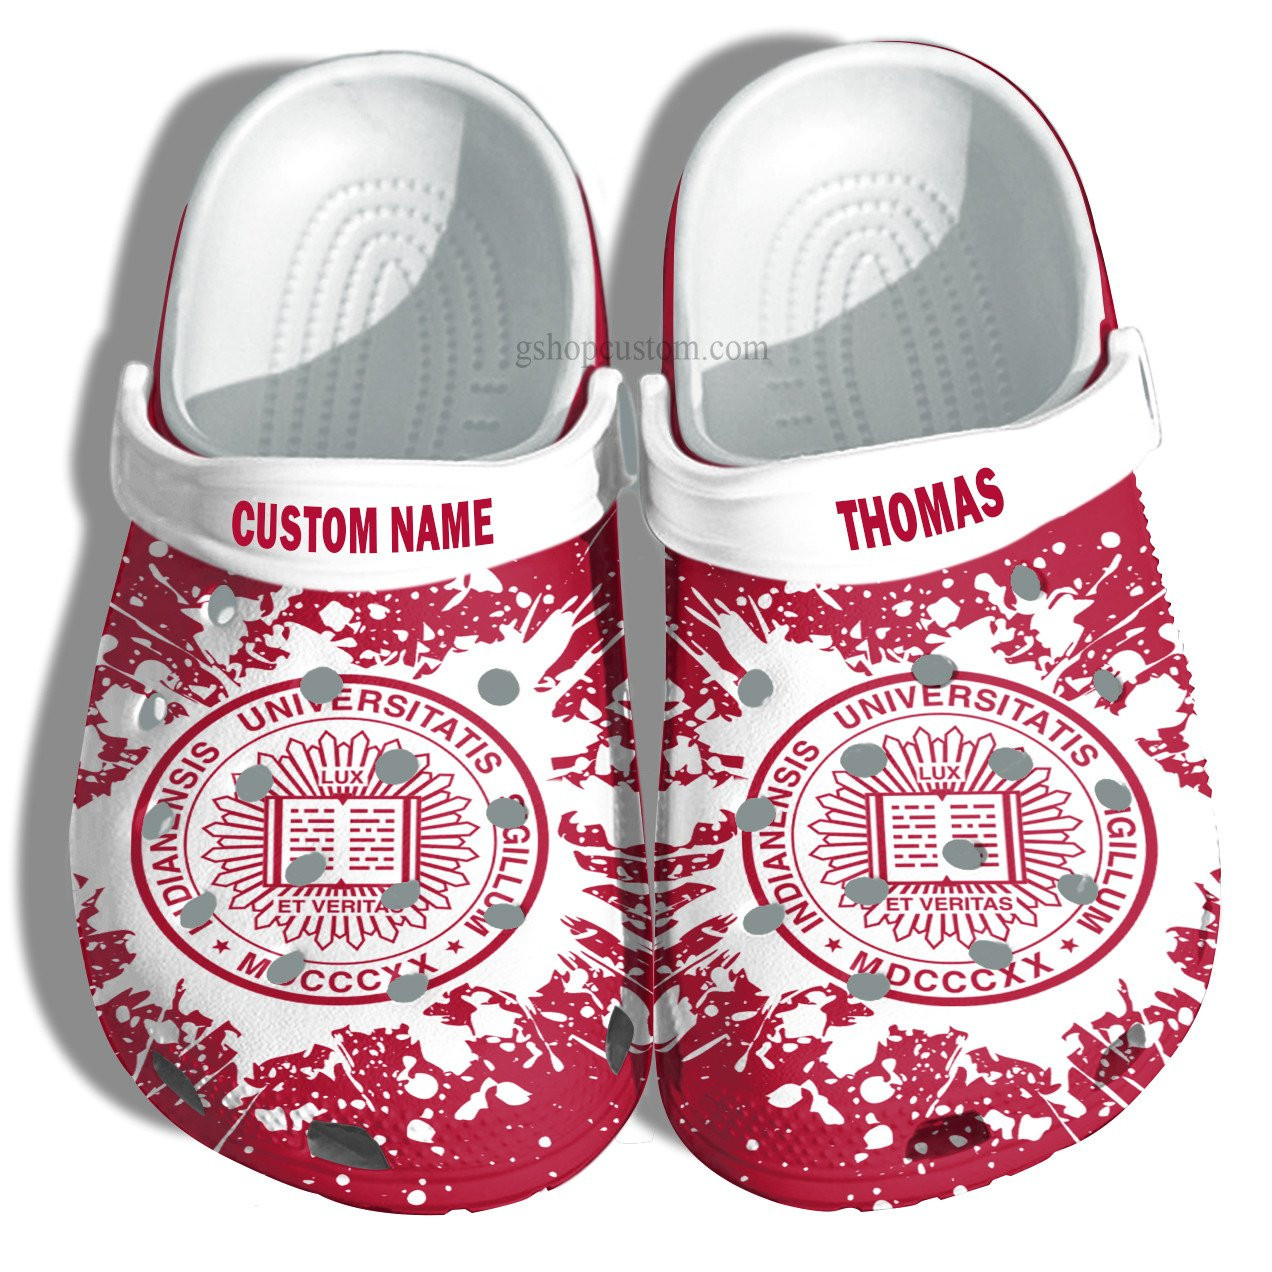 Indiana University Bloomington Graduation Gifts Croc Shoes Customize- Admission Gift Crocs Shoes